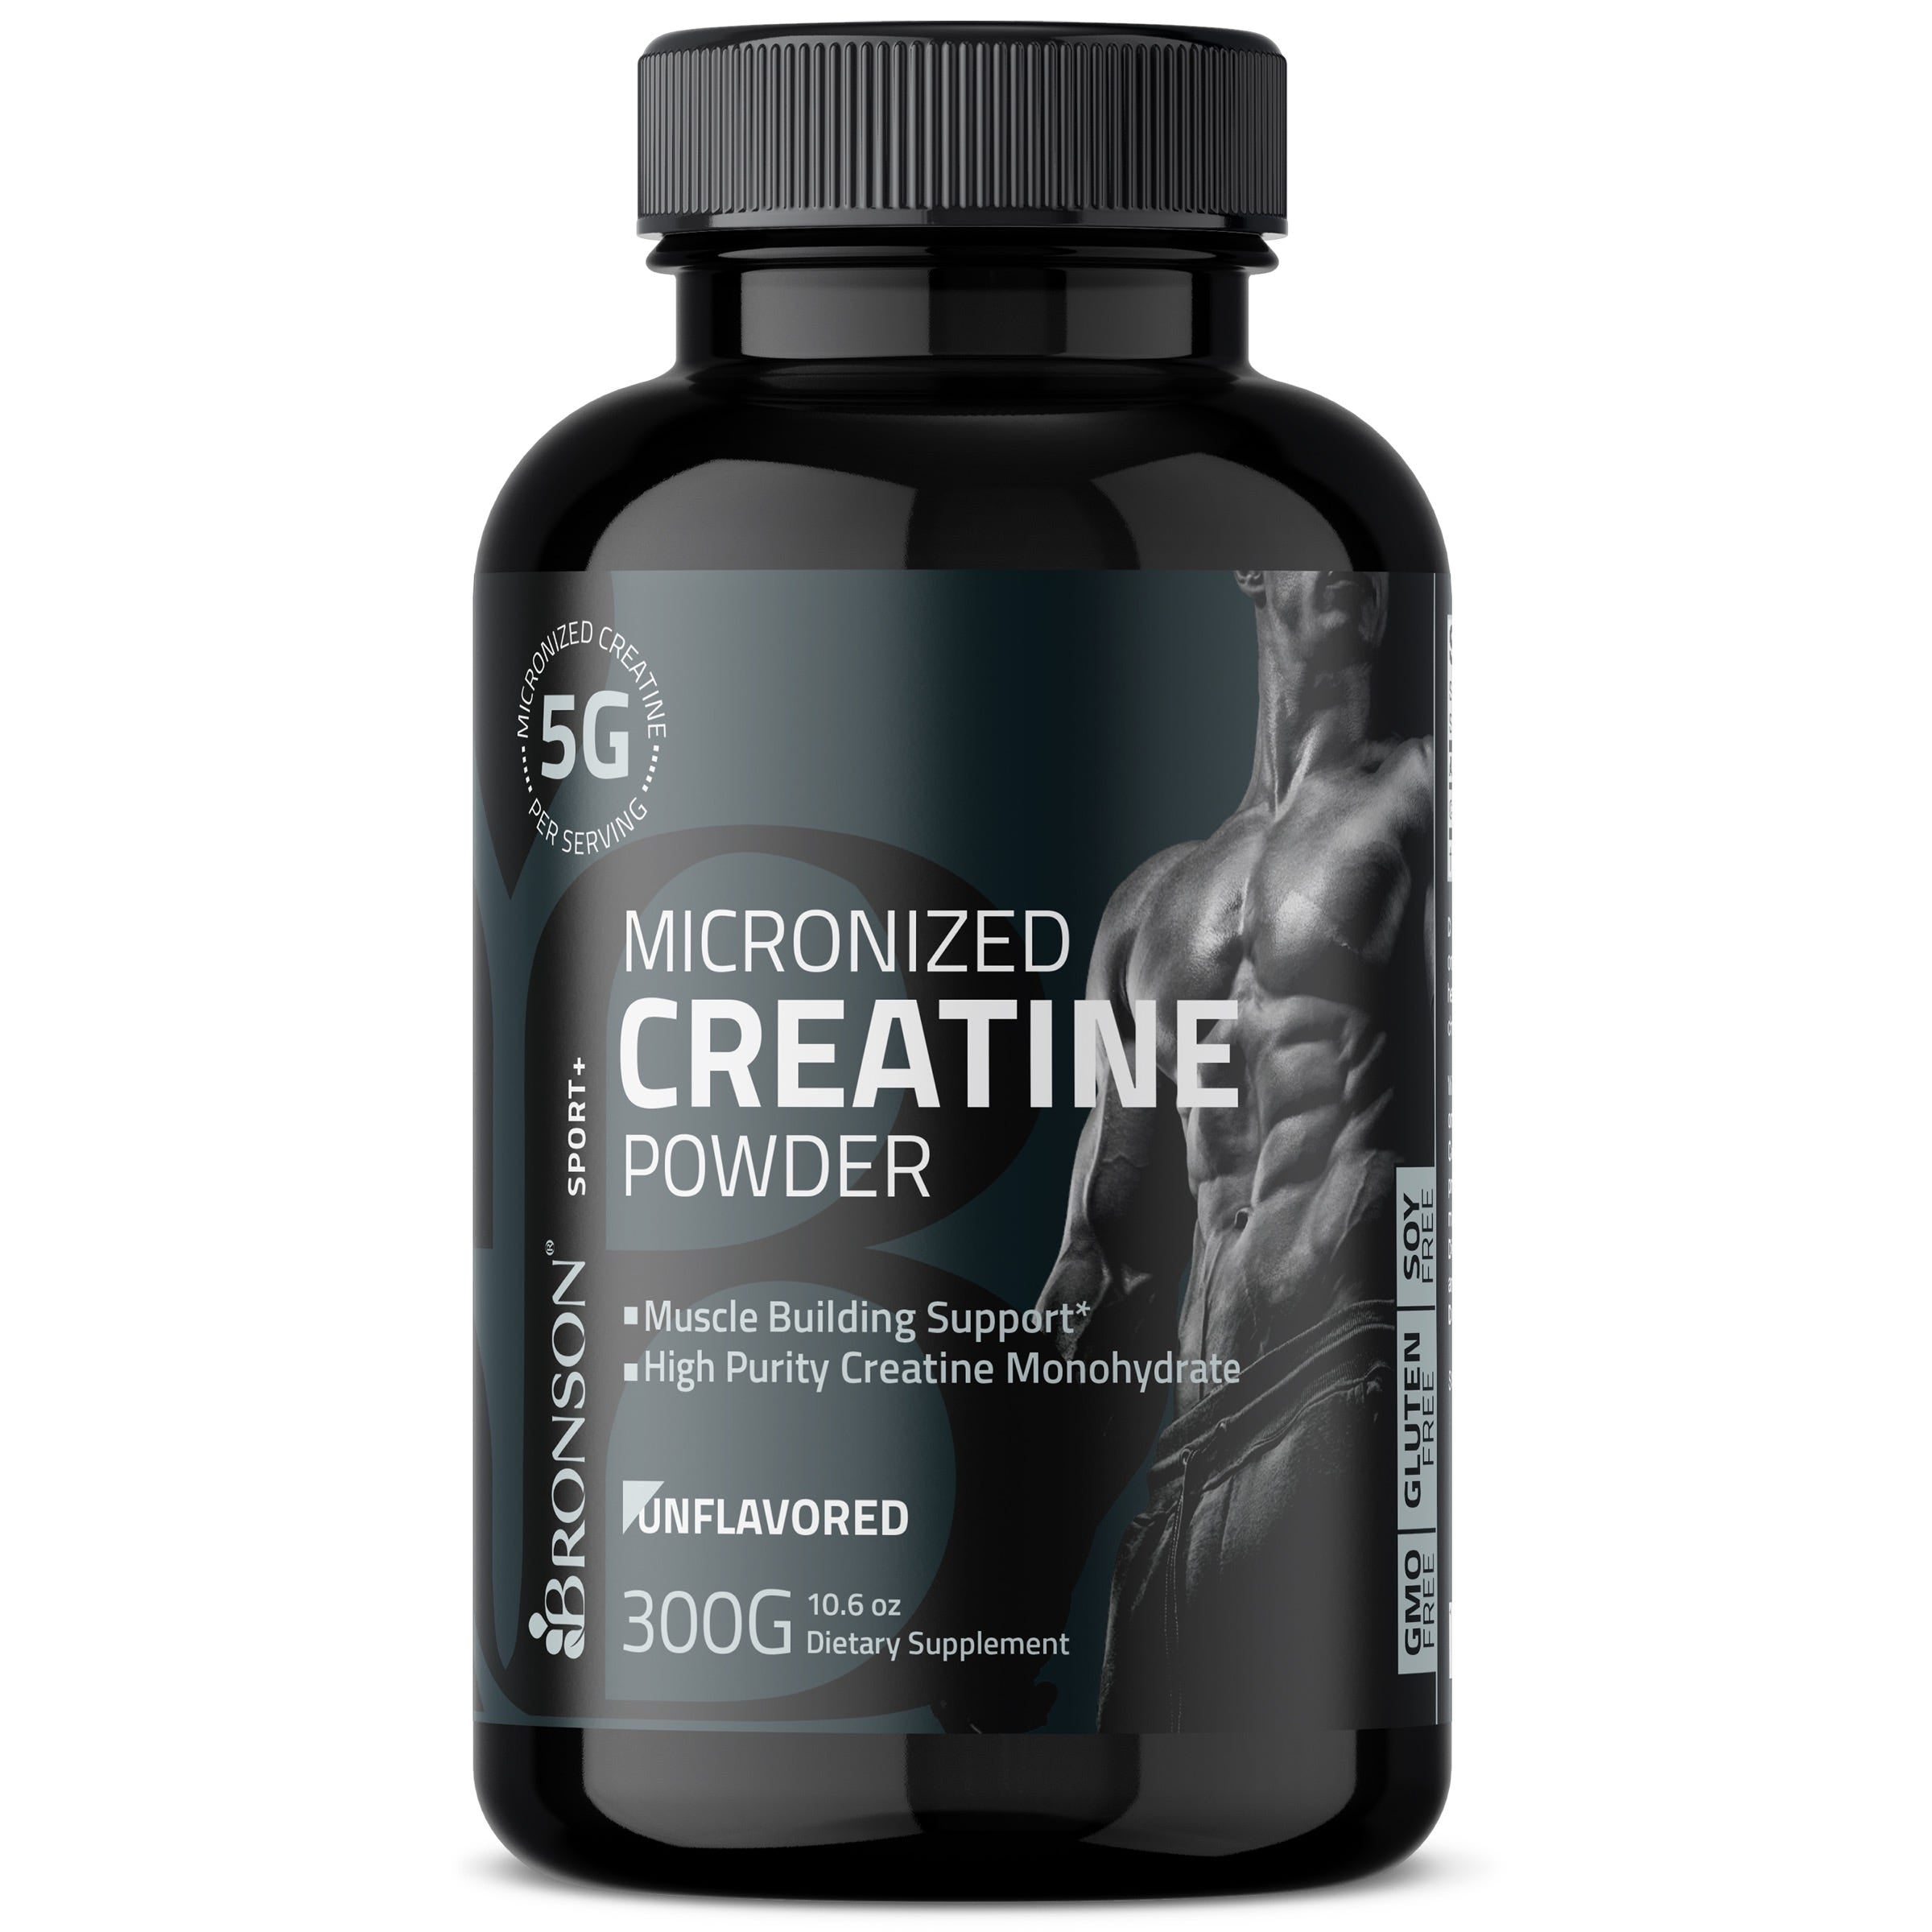 Micronized Creatine Powder Unflavored, 300 Grams (10.6 OZ) view 1 of 4